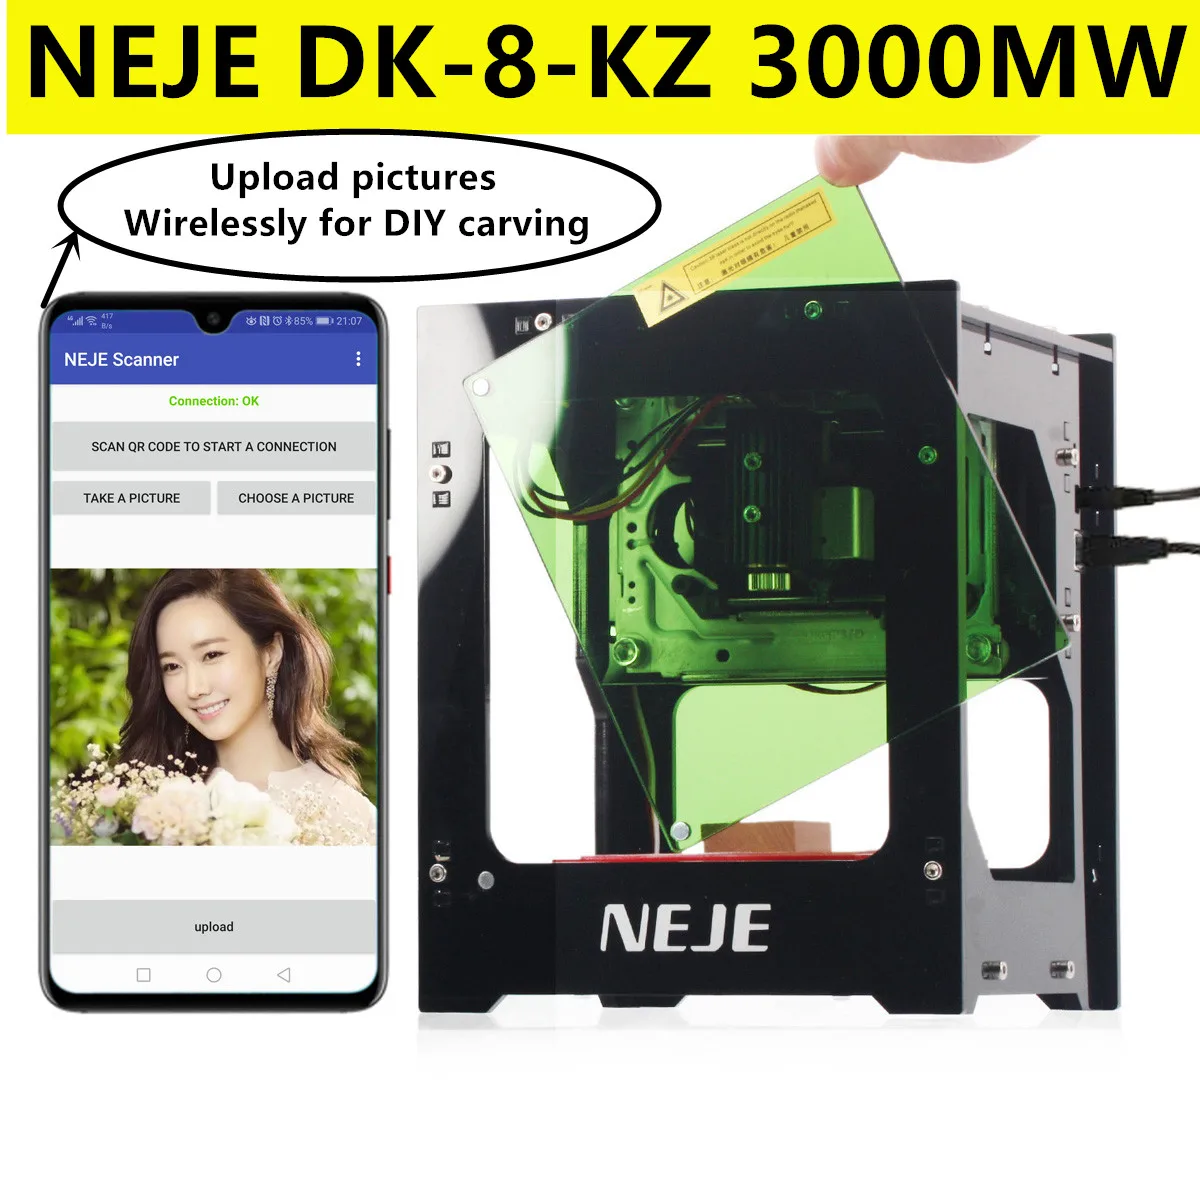 USA 3000mW Laser Engraving Machine DIY Print Carving with Wireless APP Control 